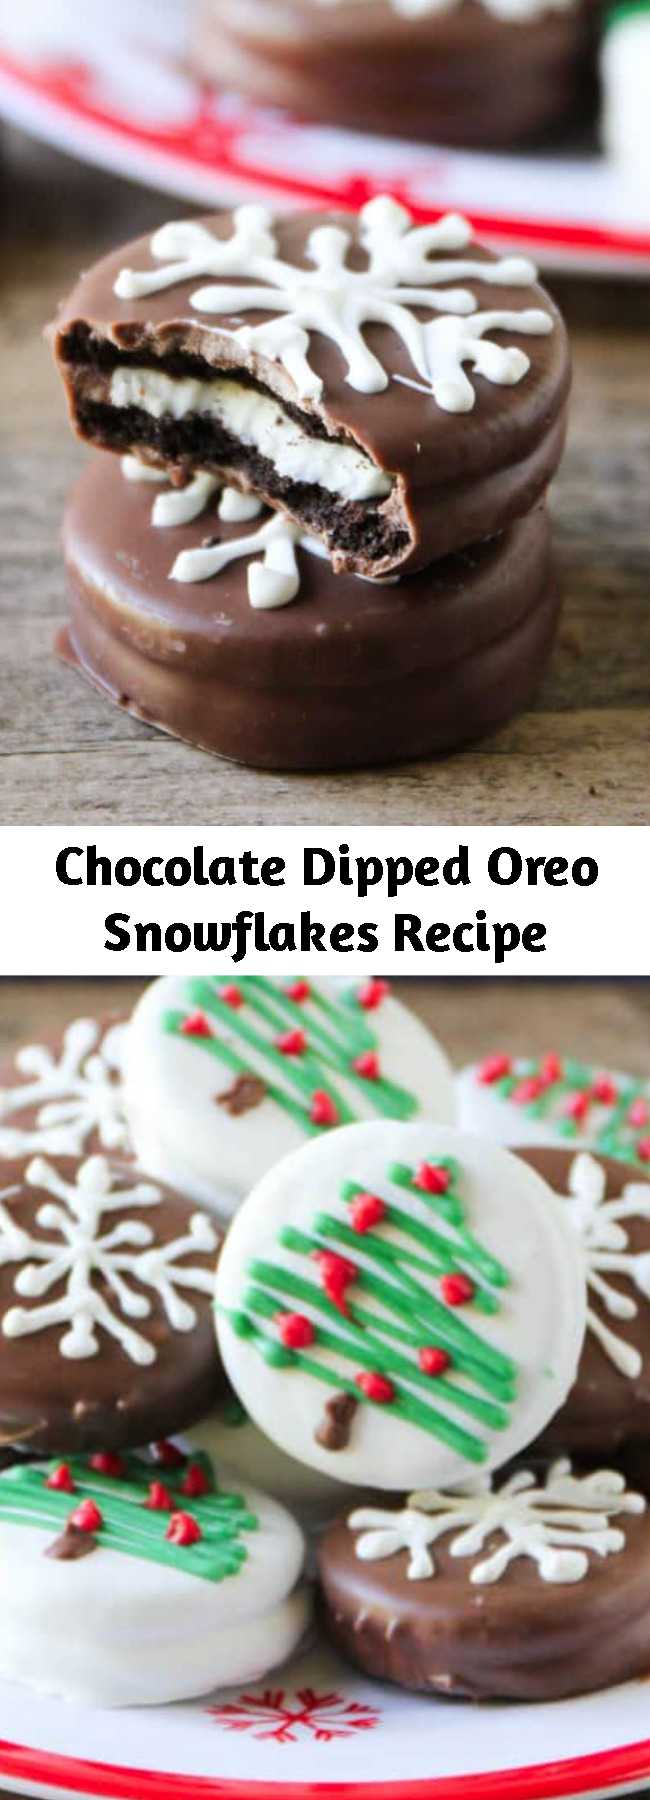 Chocolate Dipped Oreo Snowflakes Recipe - These chocolate dipped Oreo snowflakes are adorable and easy treats the whole family can help make! Only takes 2 ingredients to make.